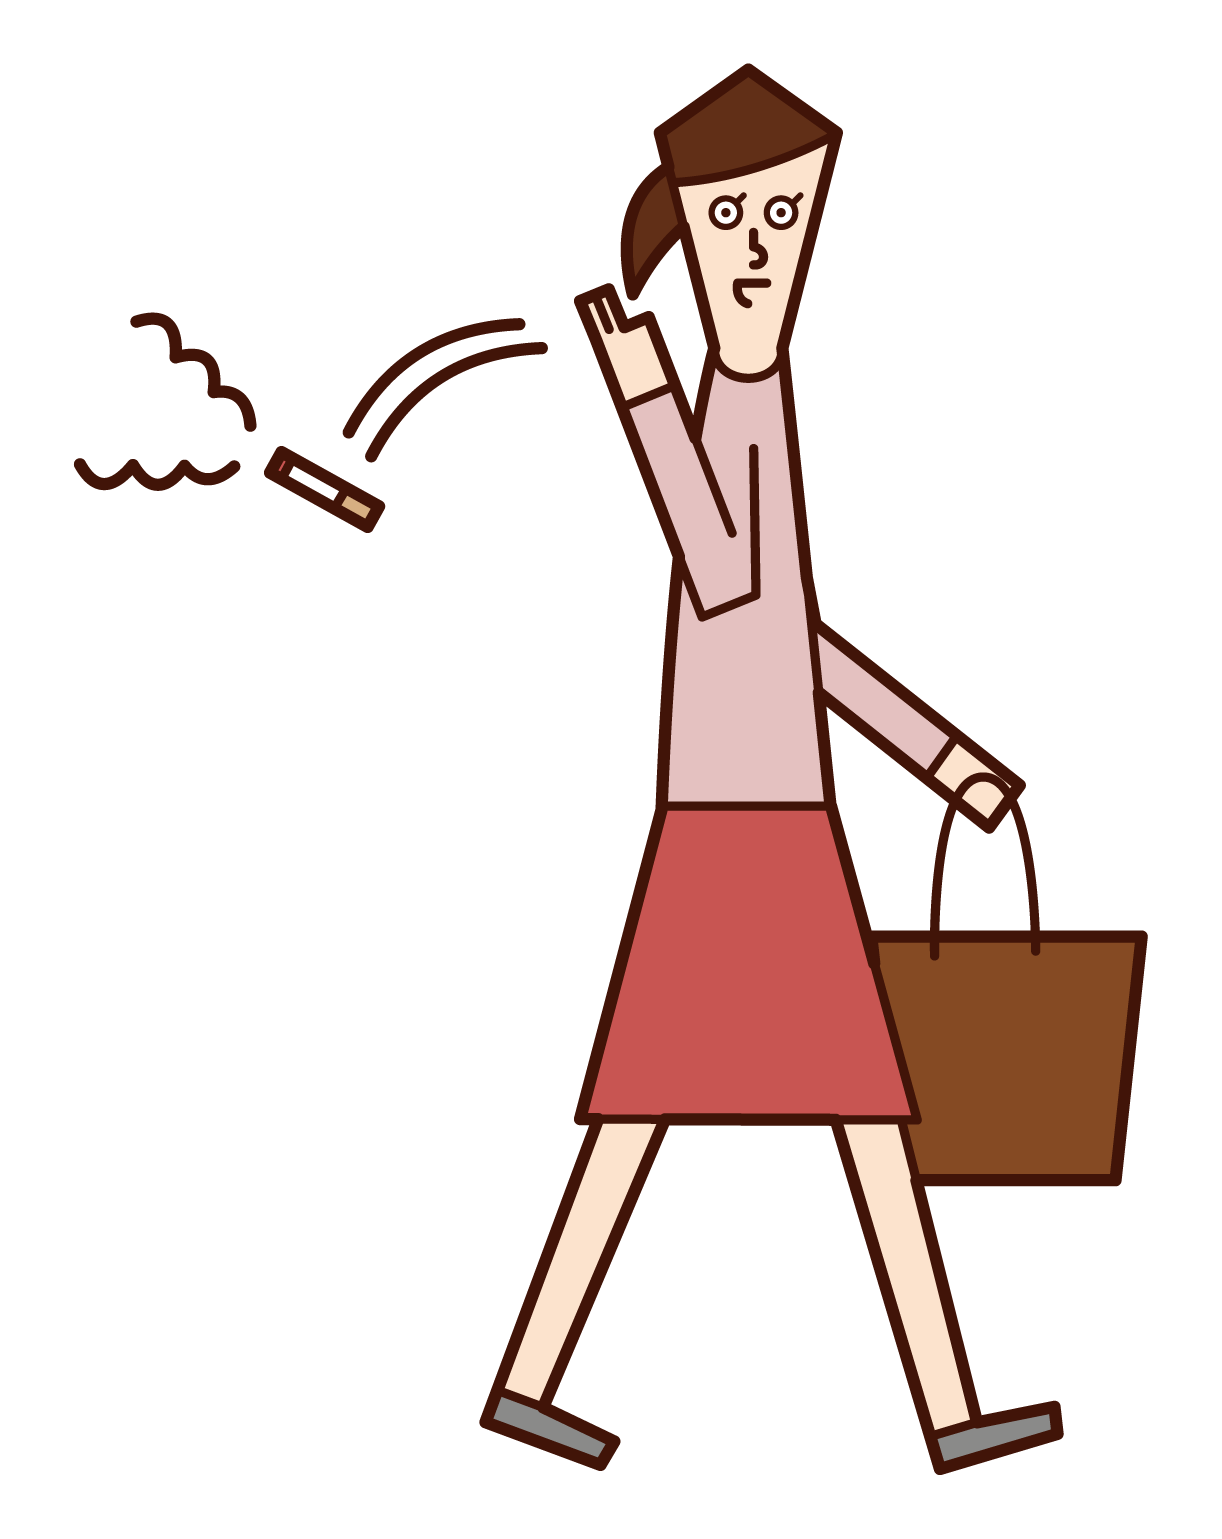 Illustration of a woman throwing a cigarette on the street